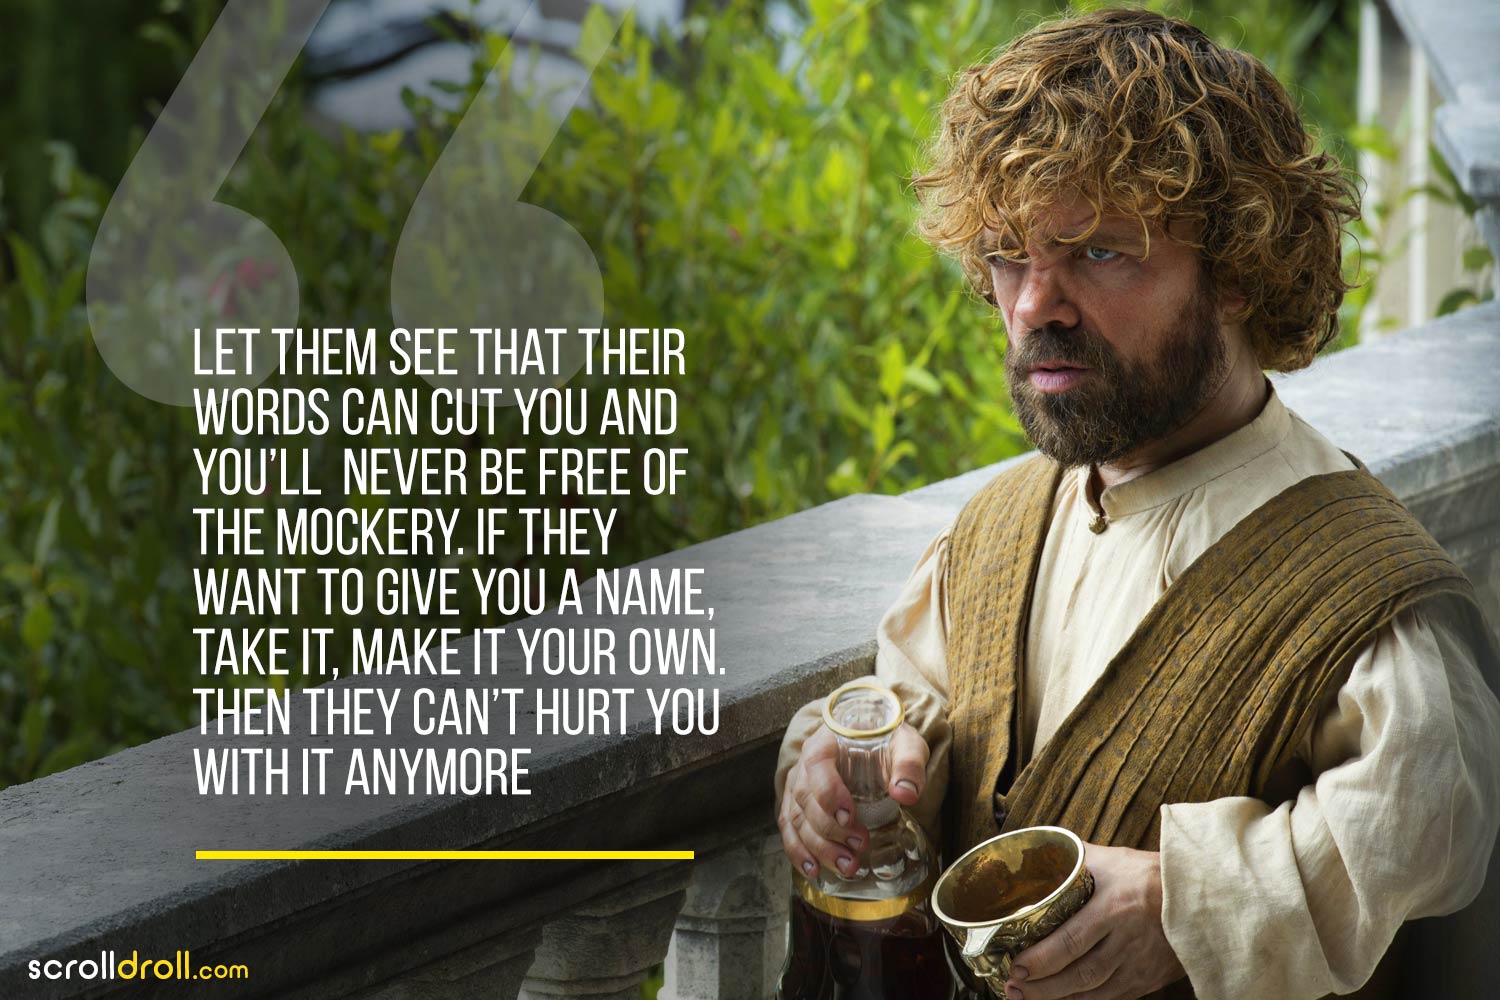 33 Tyrion Lannister Quotes That Make Him The Most Loved Got Character